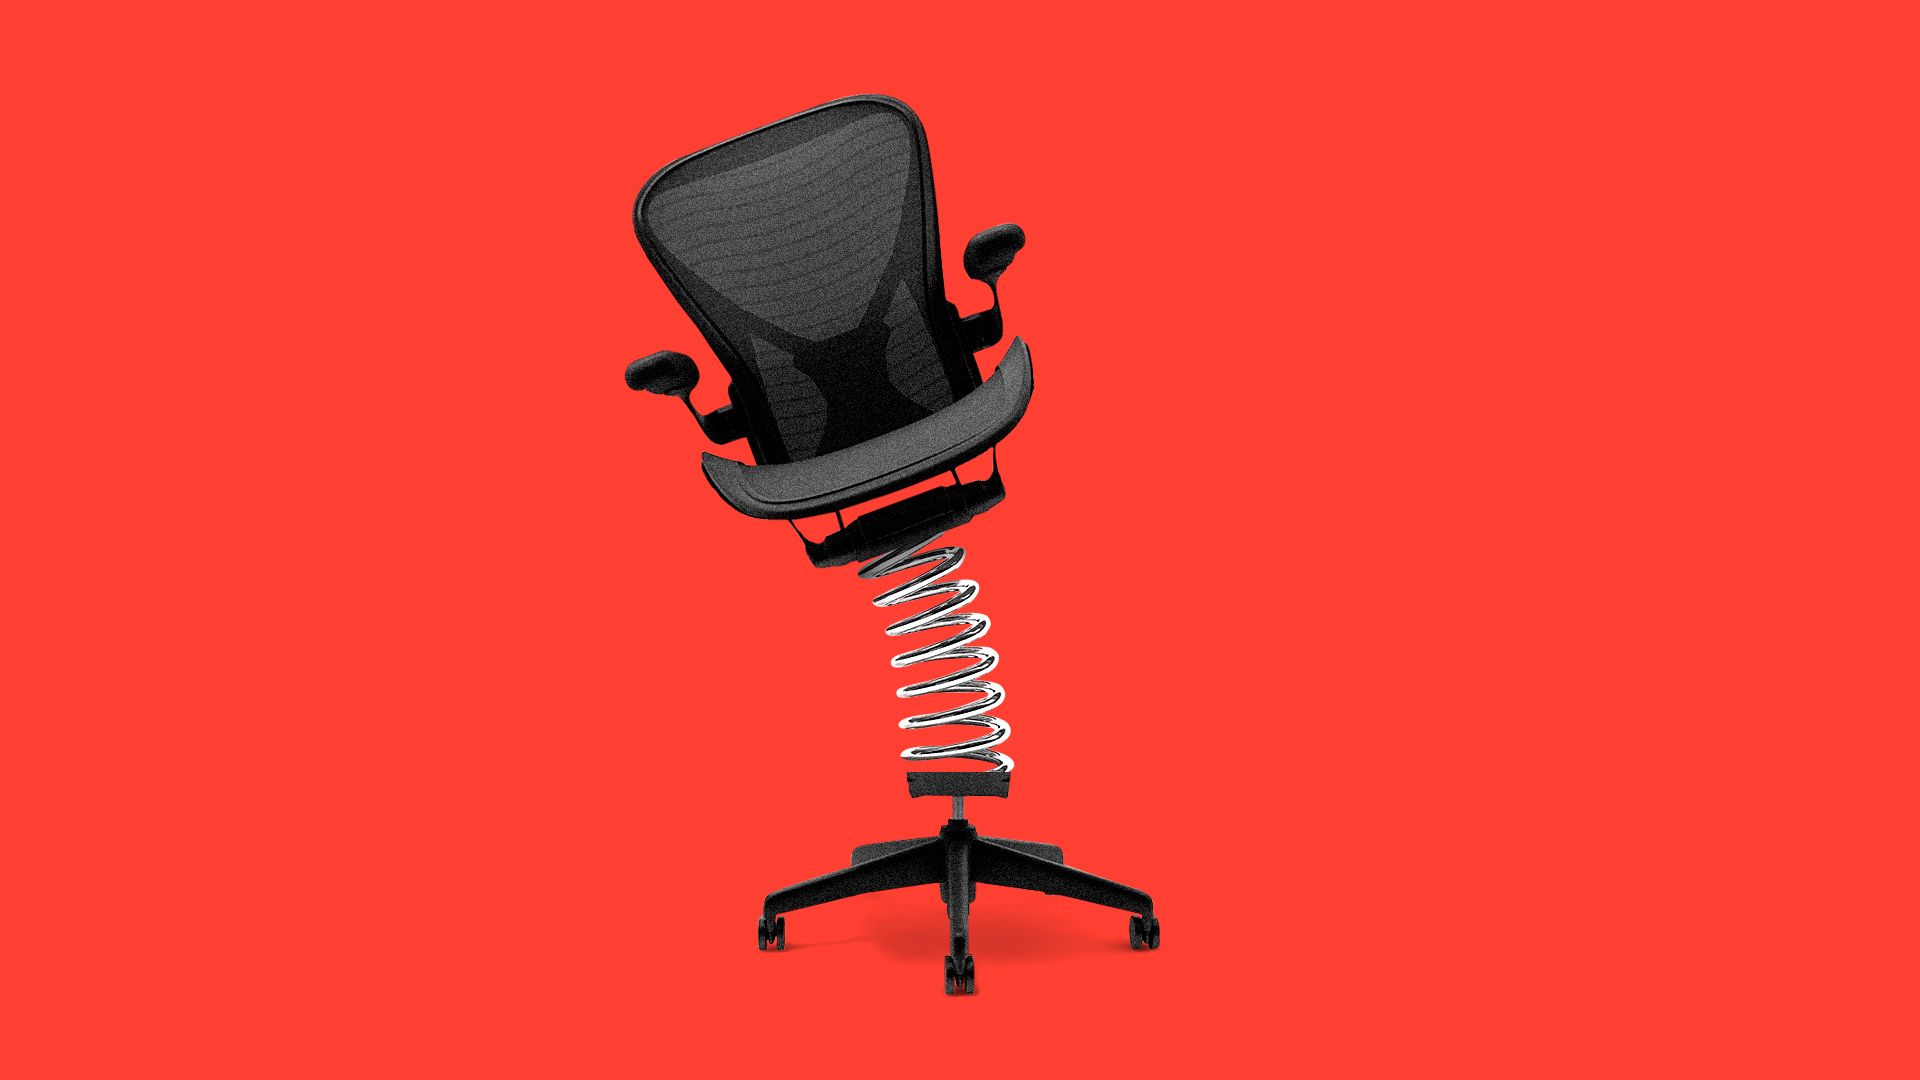 Illustration of an office chair split in half horizontally, with the seat half being ejected from the bottom half by a spring. 